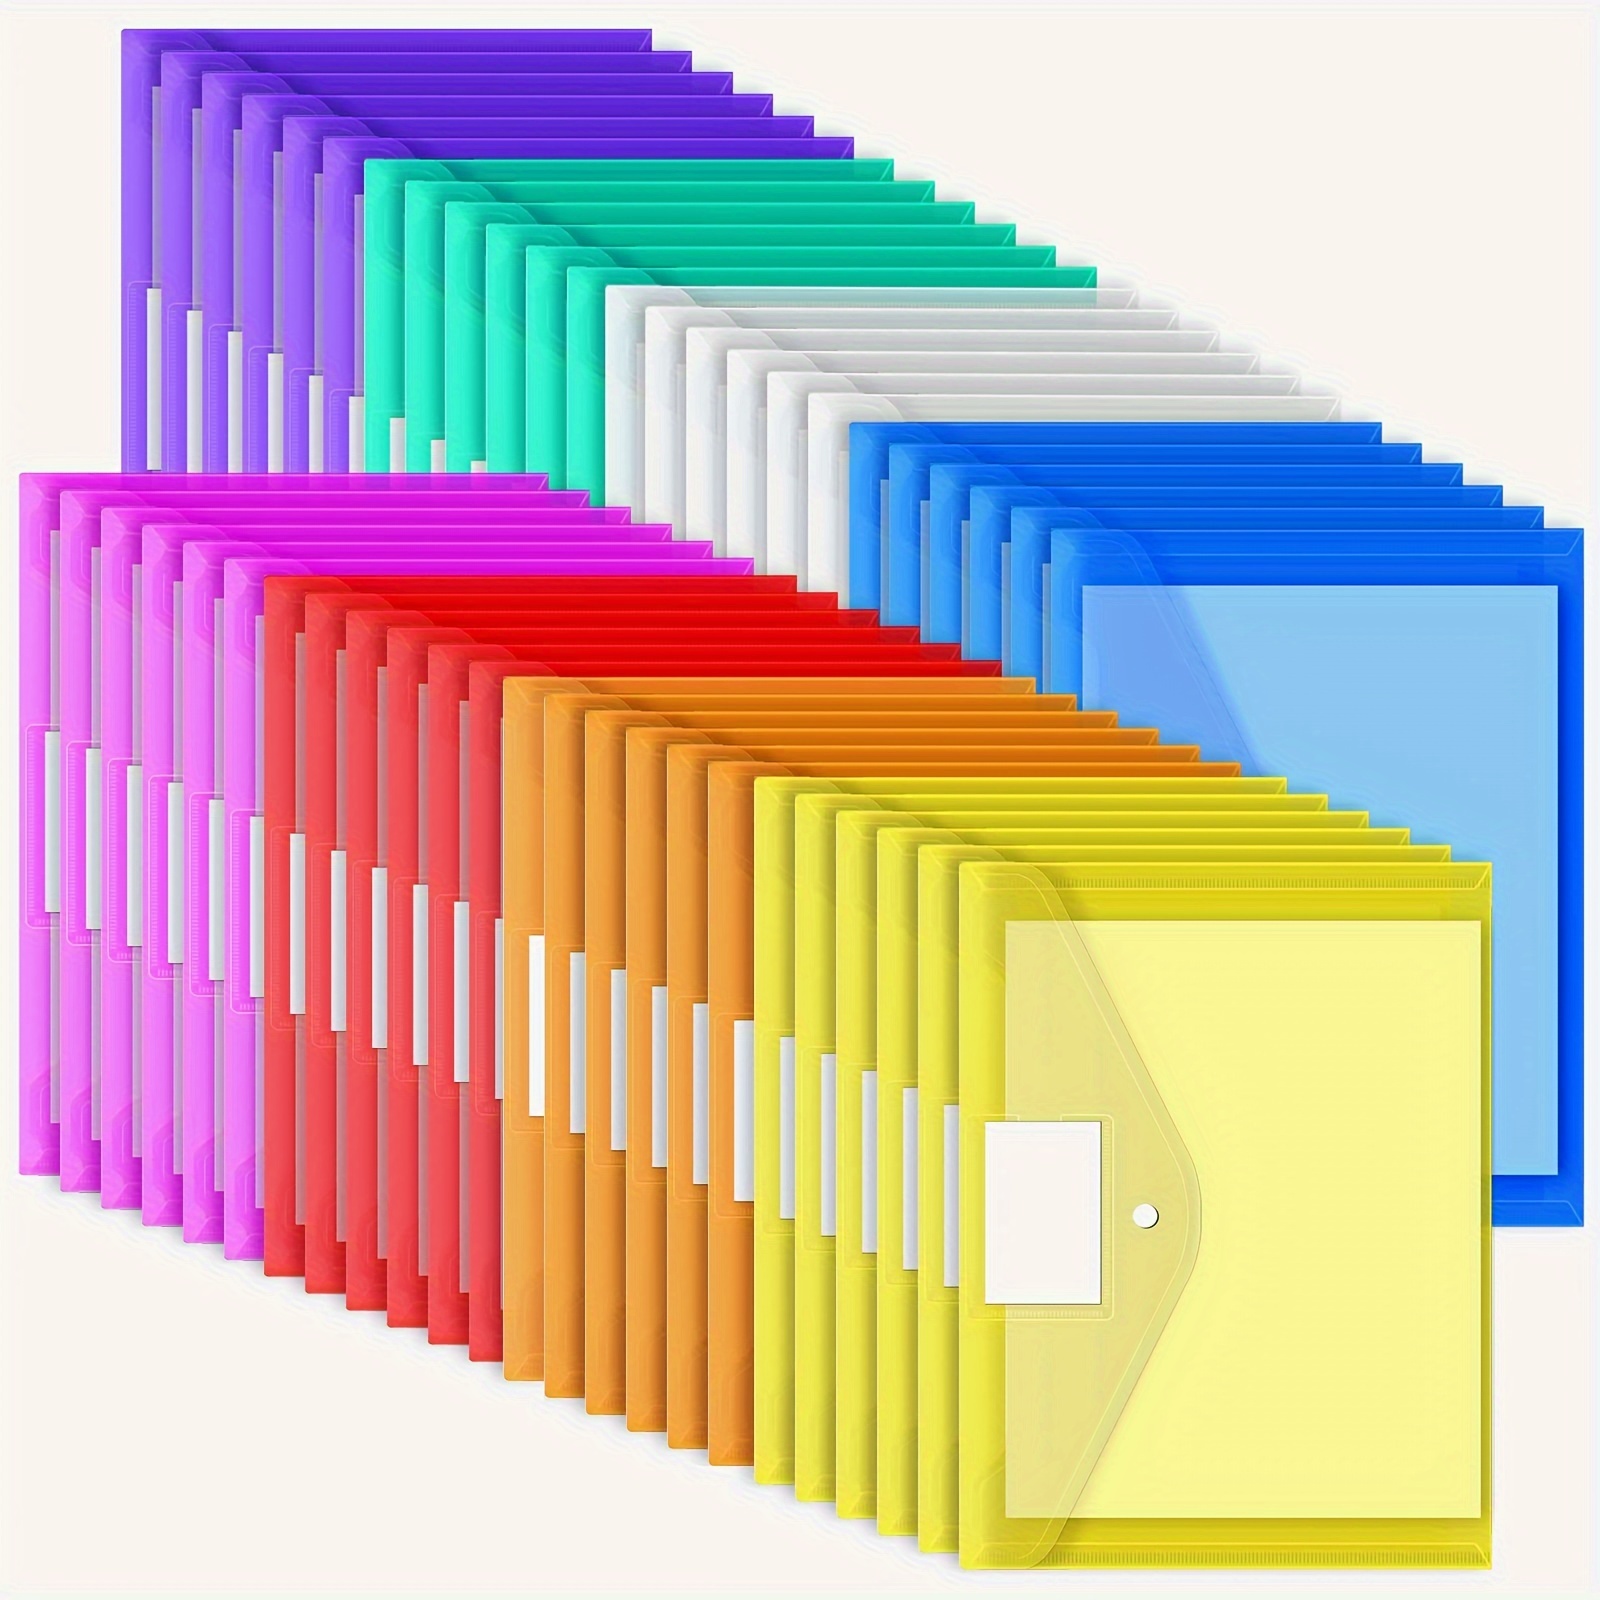 

48pcs Plastic Envelopes Poly Envelopes, Clear Document Folders With Snap Button Closure, Letter Size, A4 Size With Label Pocket For Home, Work, And Office Organization, 8 Colors, 9.45x13 Inches